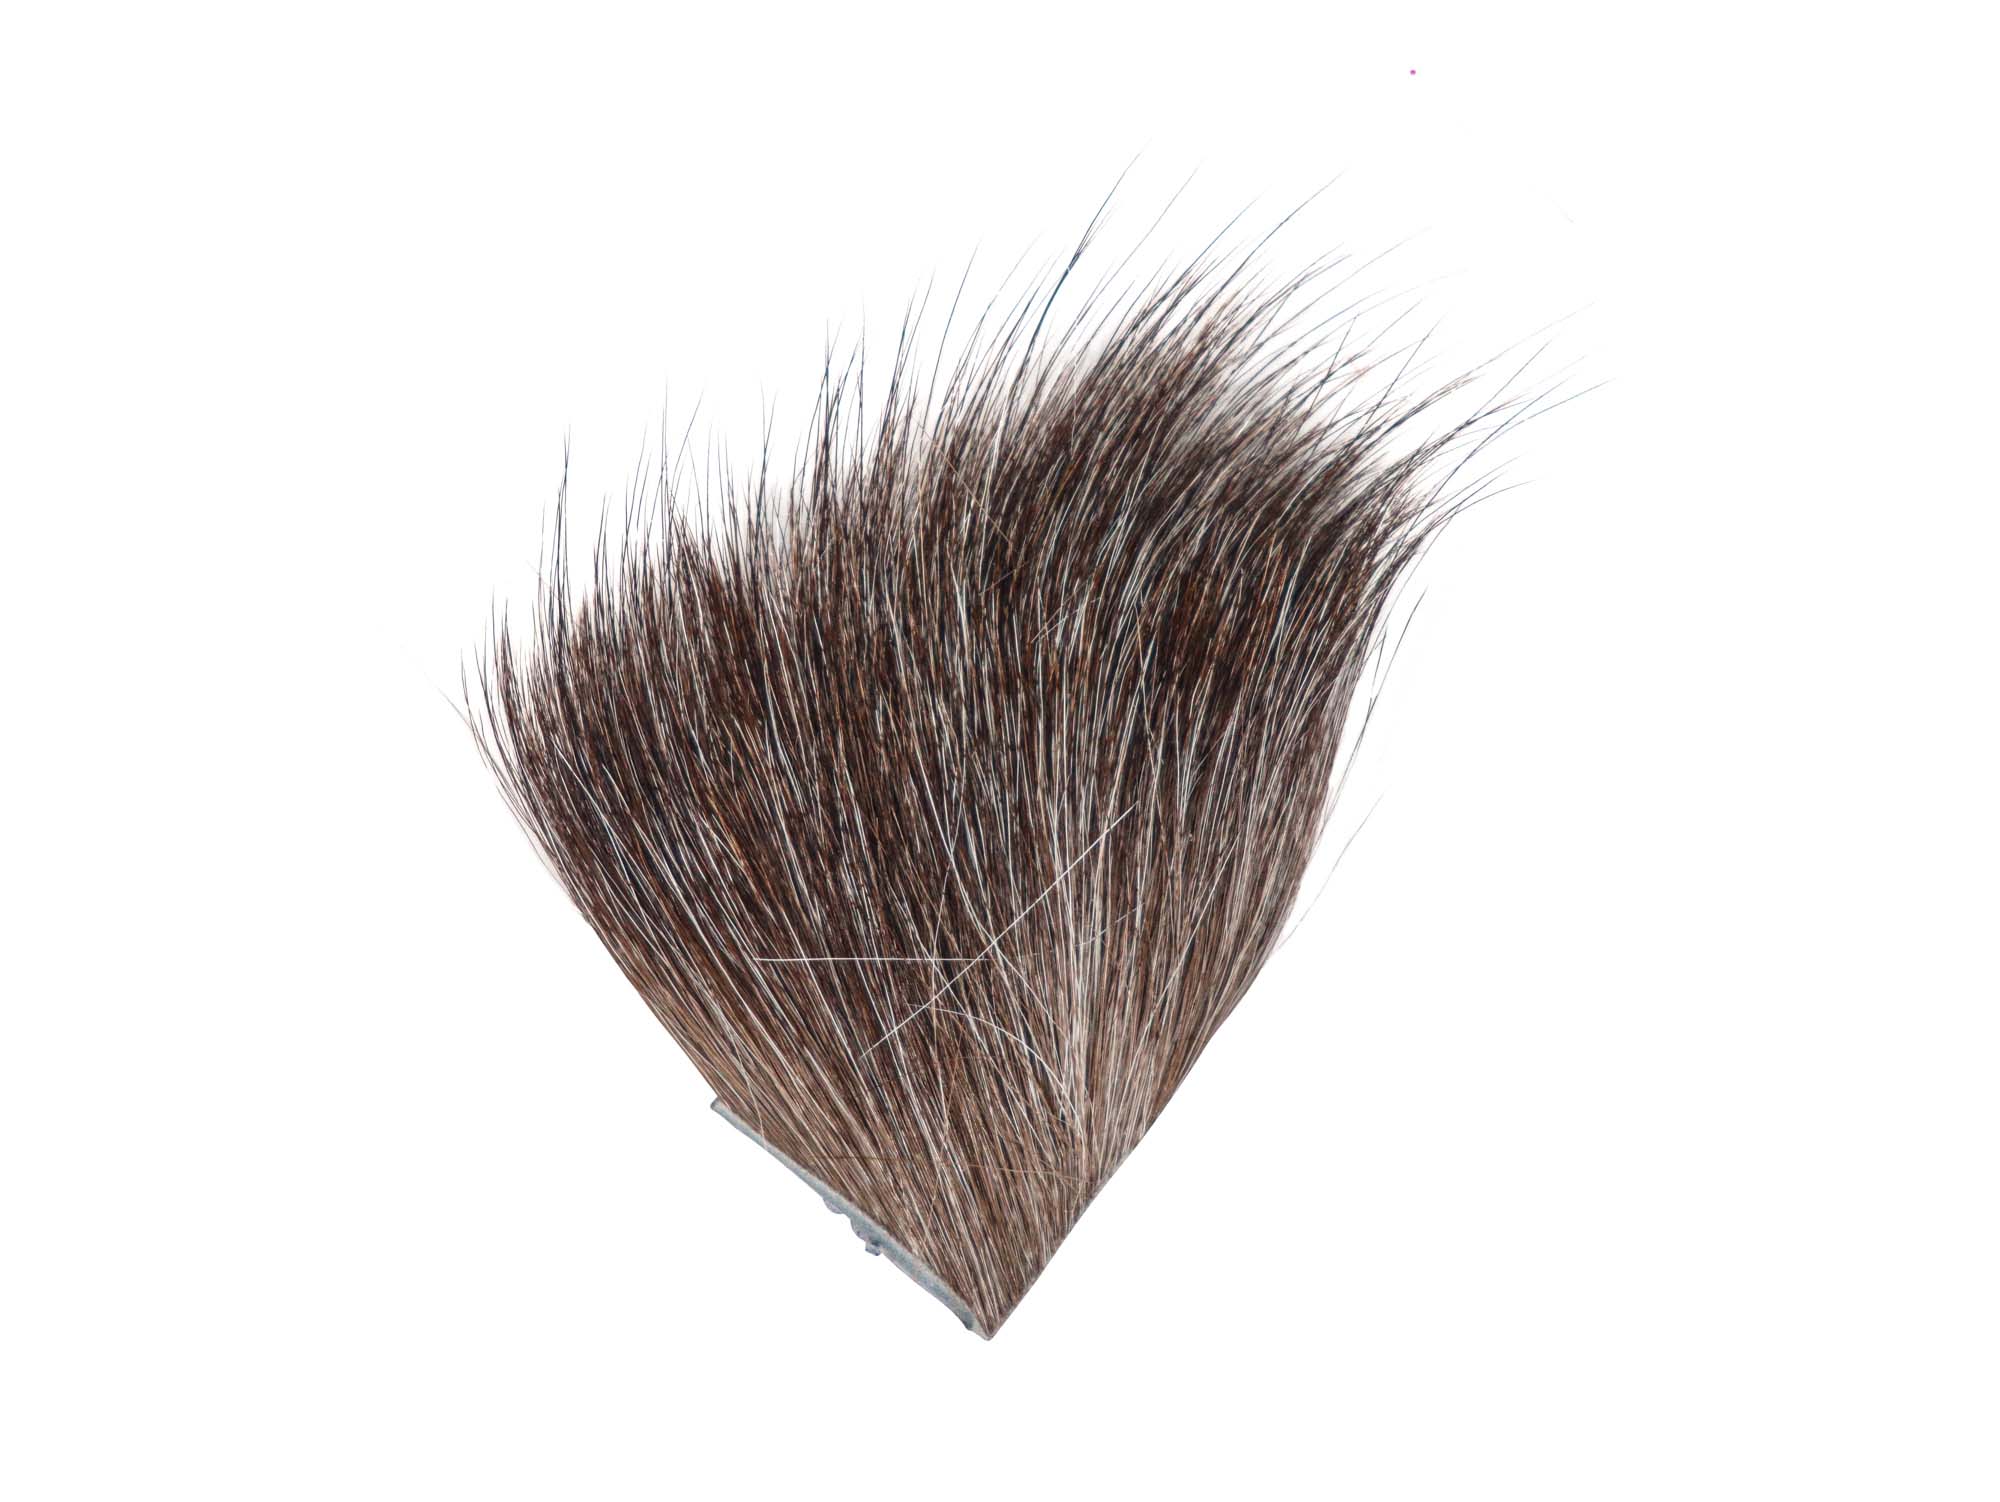 Dyed Arctic Runner Fly Fishing Piece: Gray - 1377-GY-AS (9UL4)